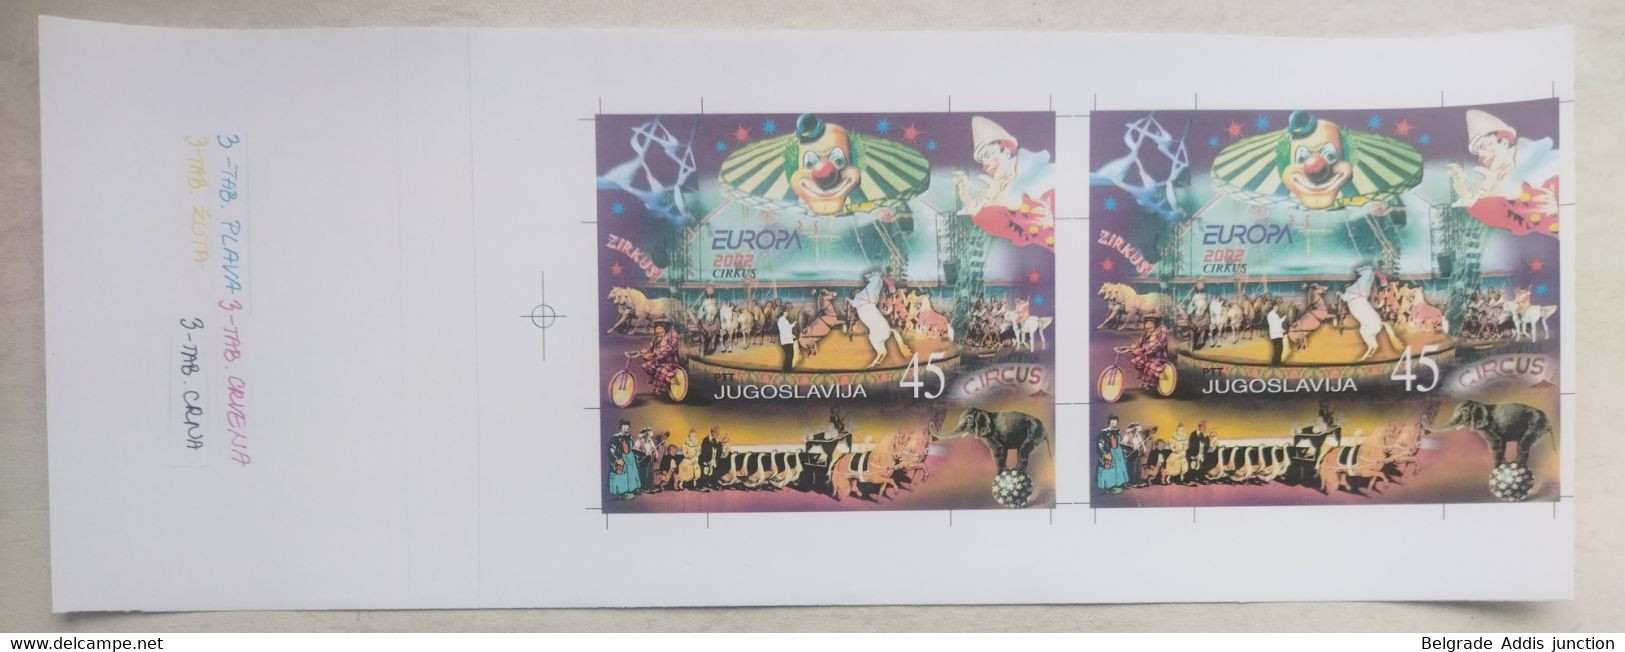 Yugoslavia Mi.Block 53 Minisheet ERROR IMPERFORATED Uncut Pair PROOF On Issued Paper  MNH / ** 2002 Europa Circus - Imperforates, Proofs & Errors